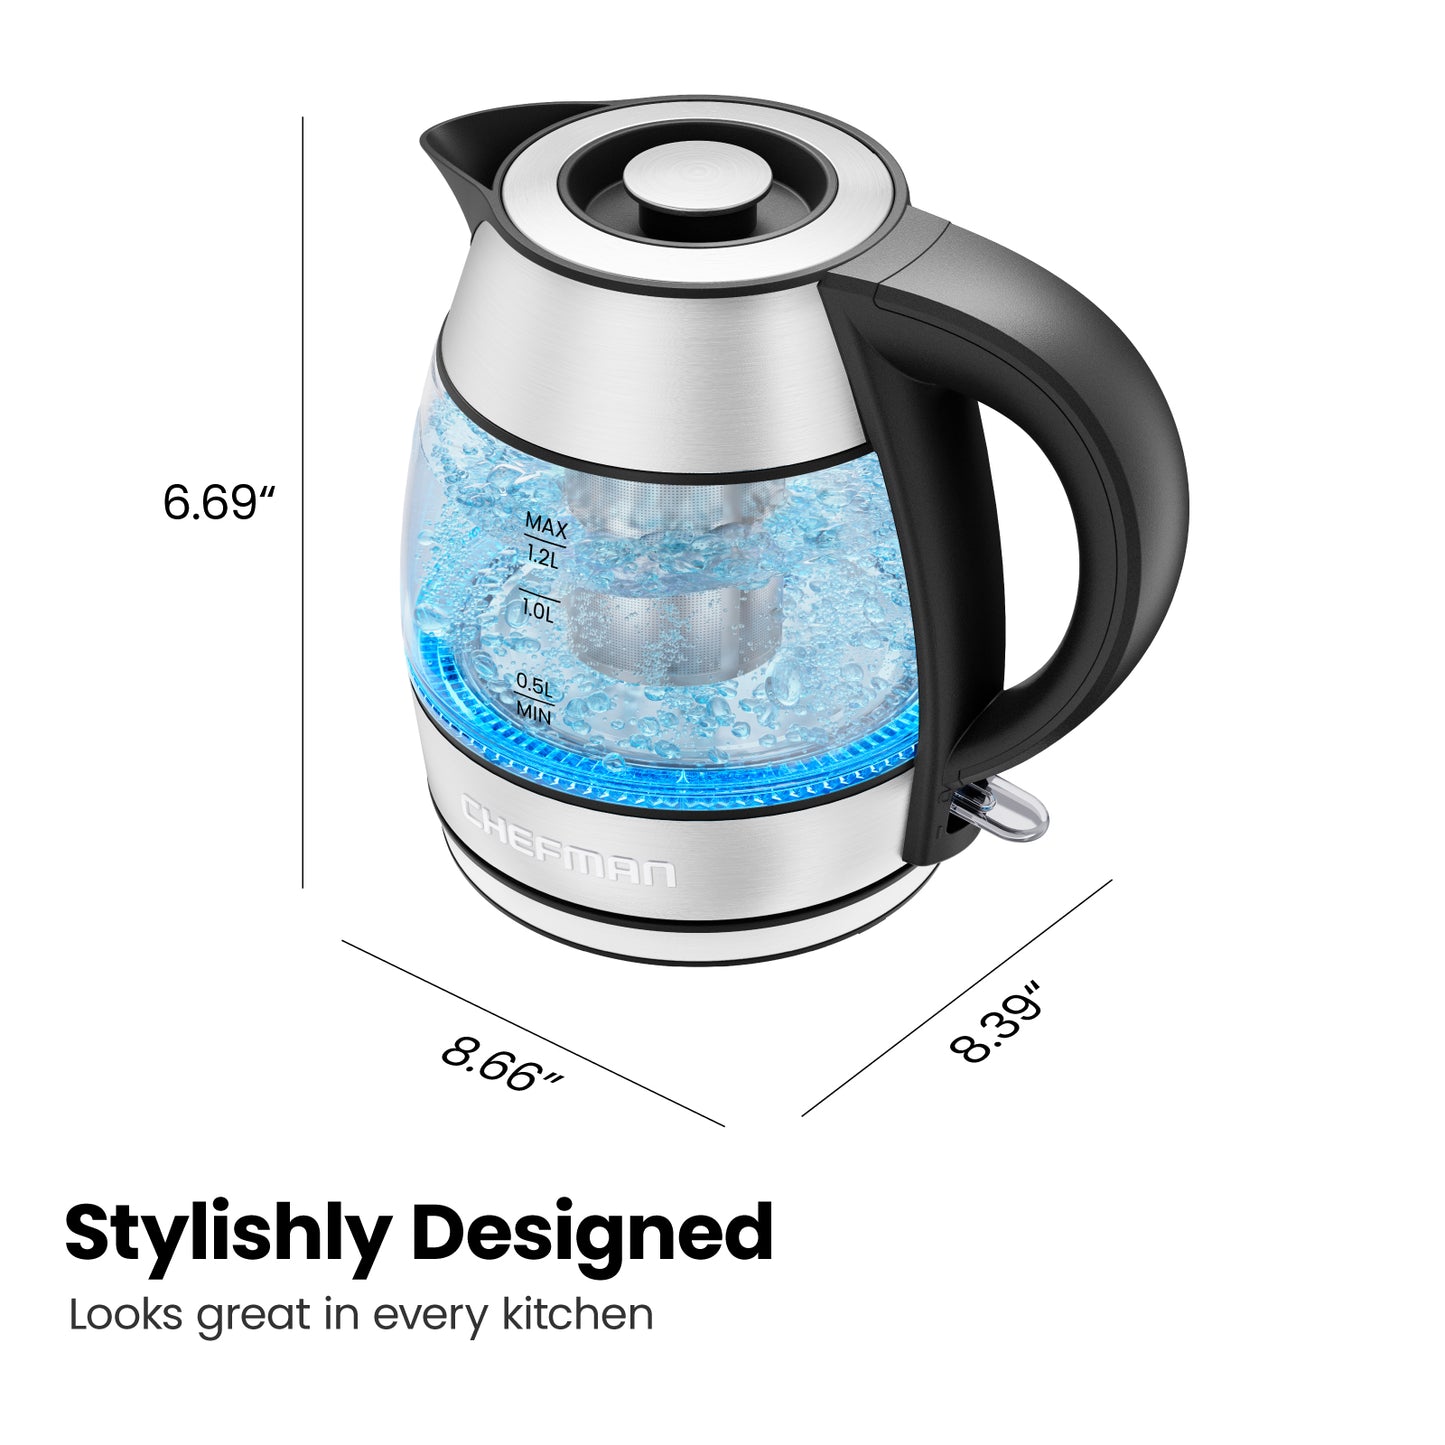 Fast-Boil 1.2L Electric Kettle with Tea Infuser